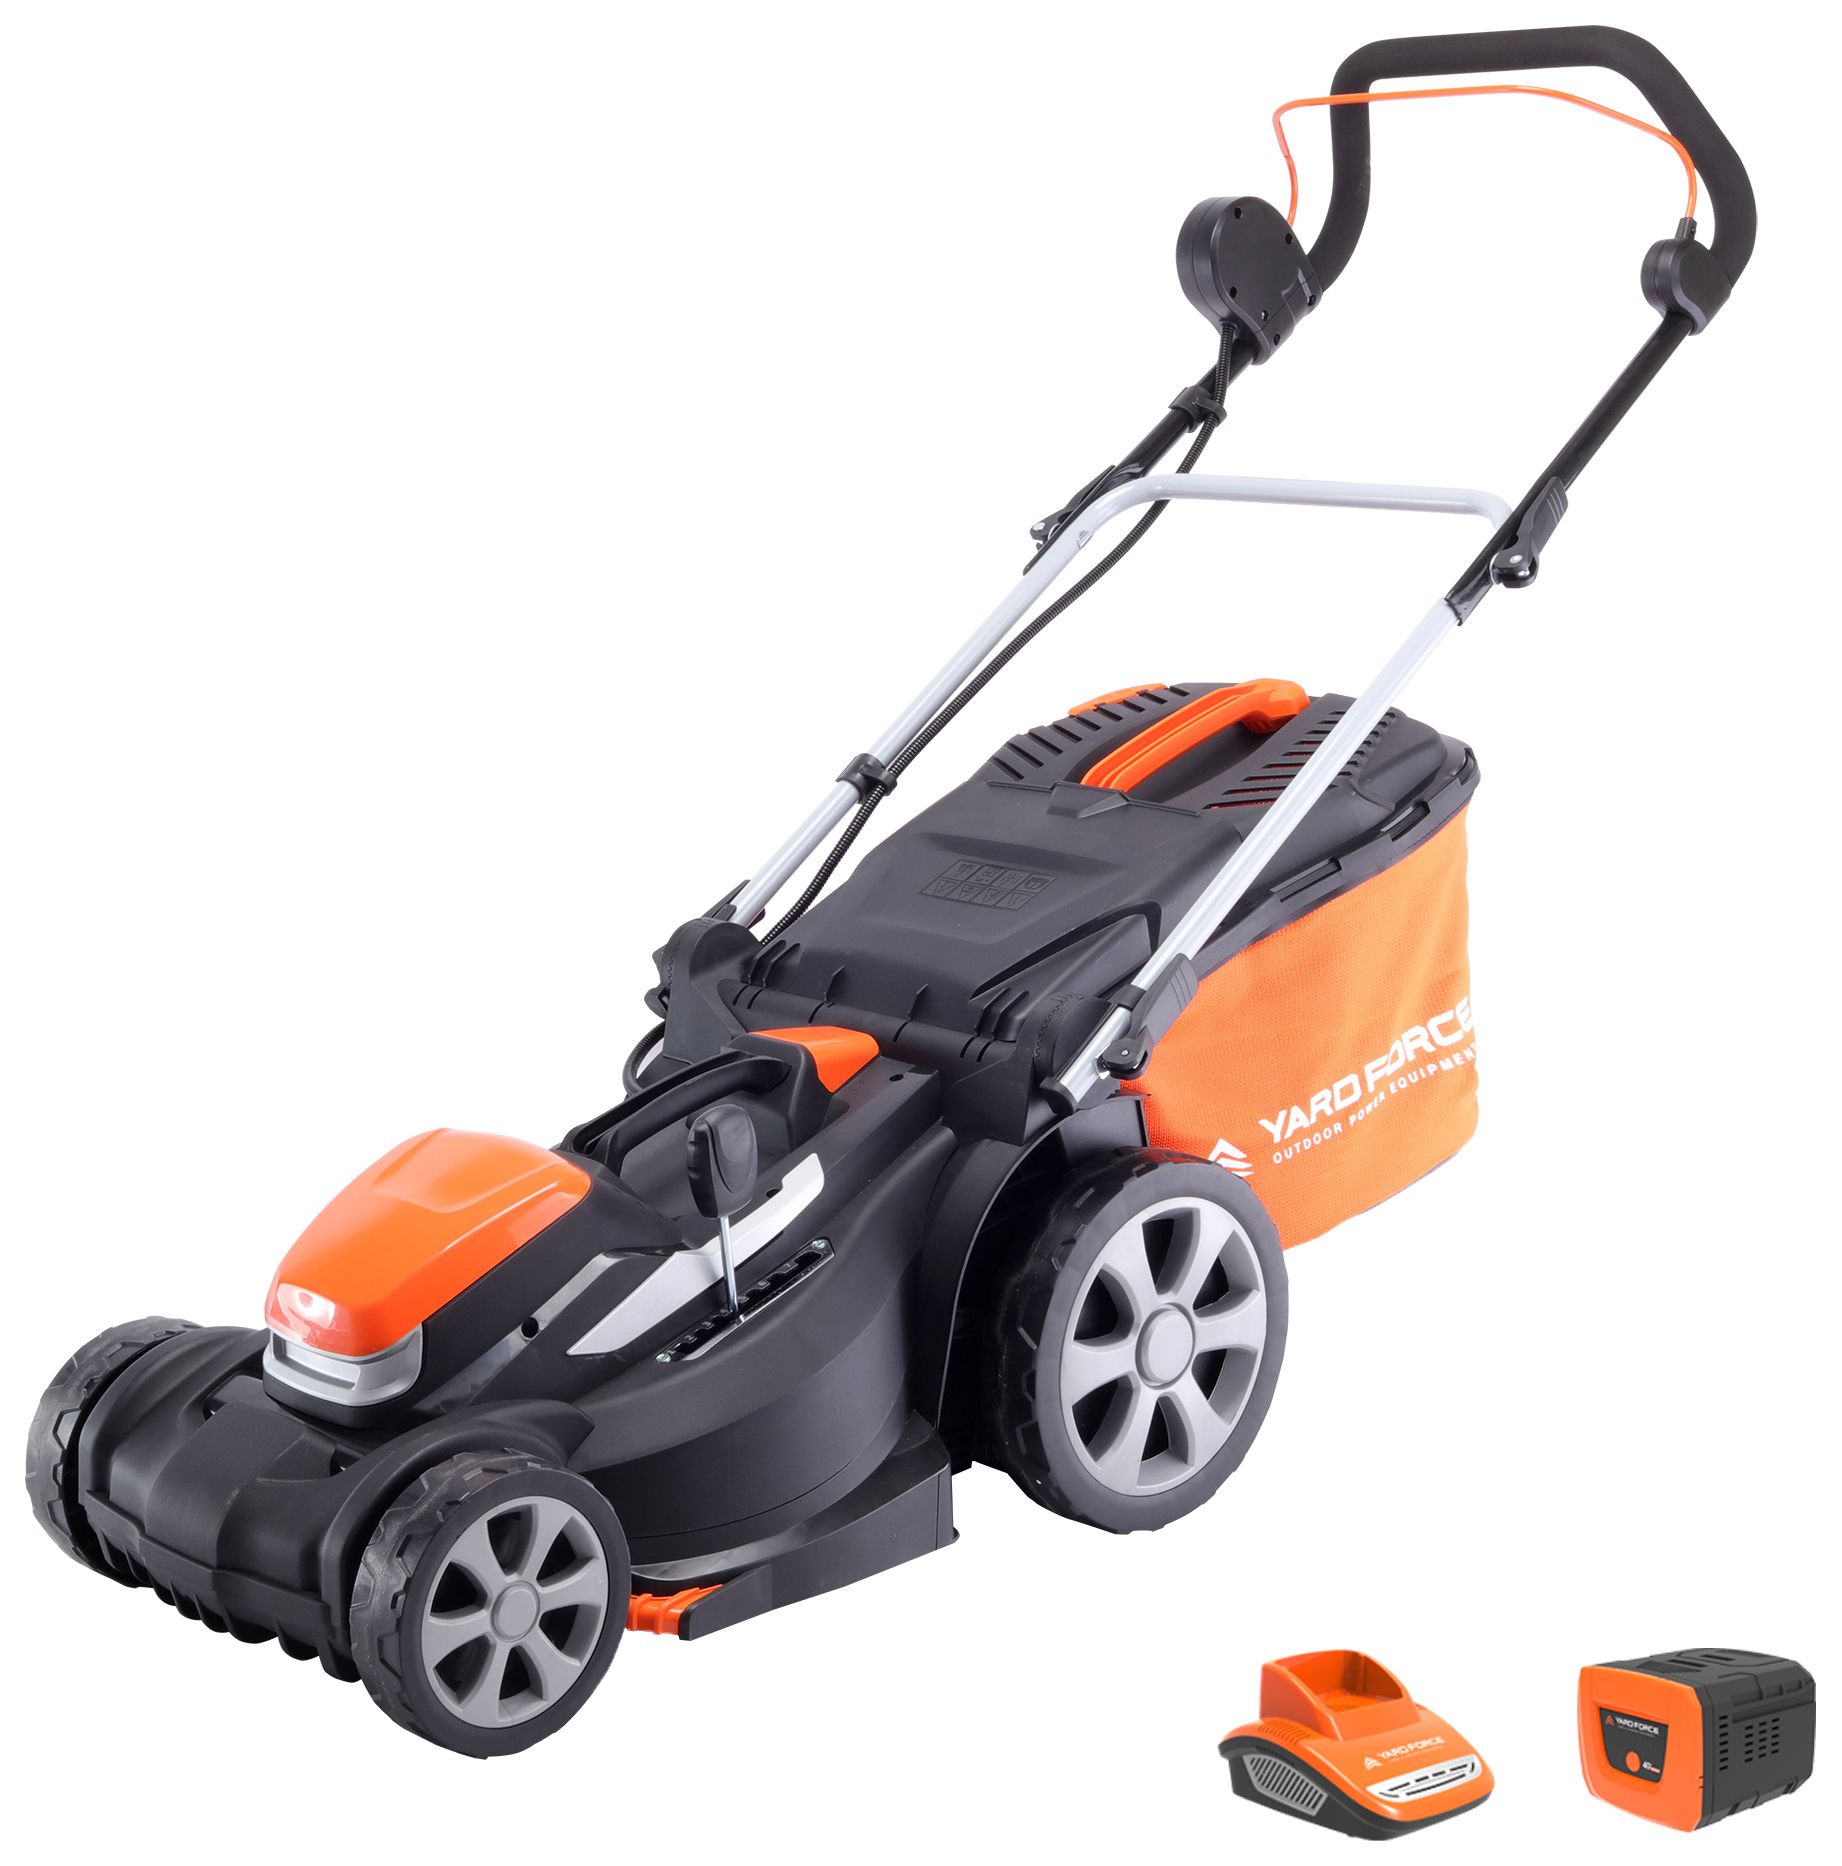 Image of Yard Force 40V 34cm Cordless Lawnmower with Lithium-Ion battery & Quick Charger LM G34A - GR 40 range